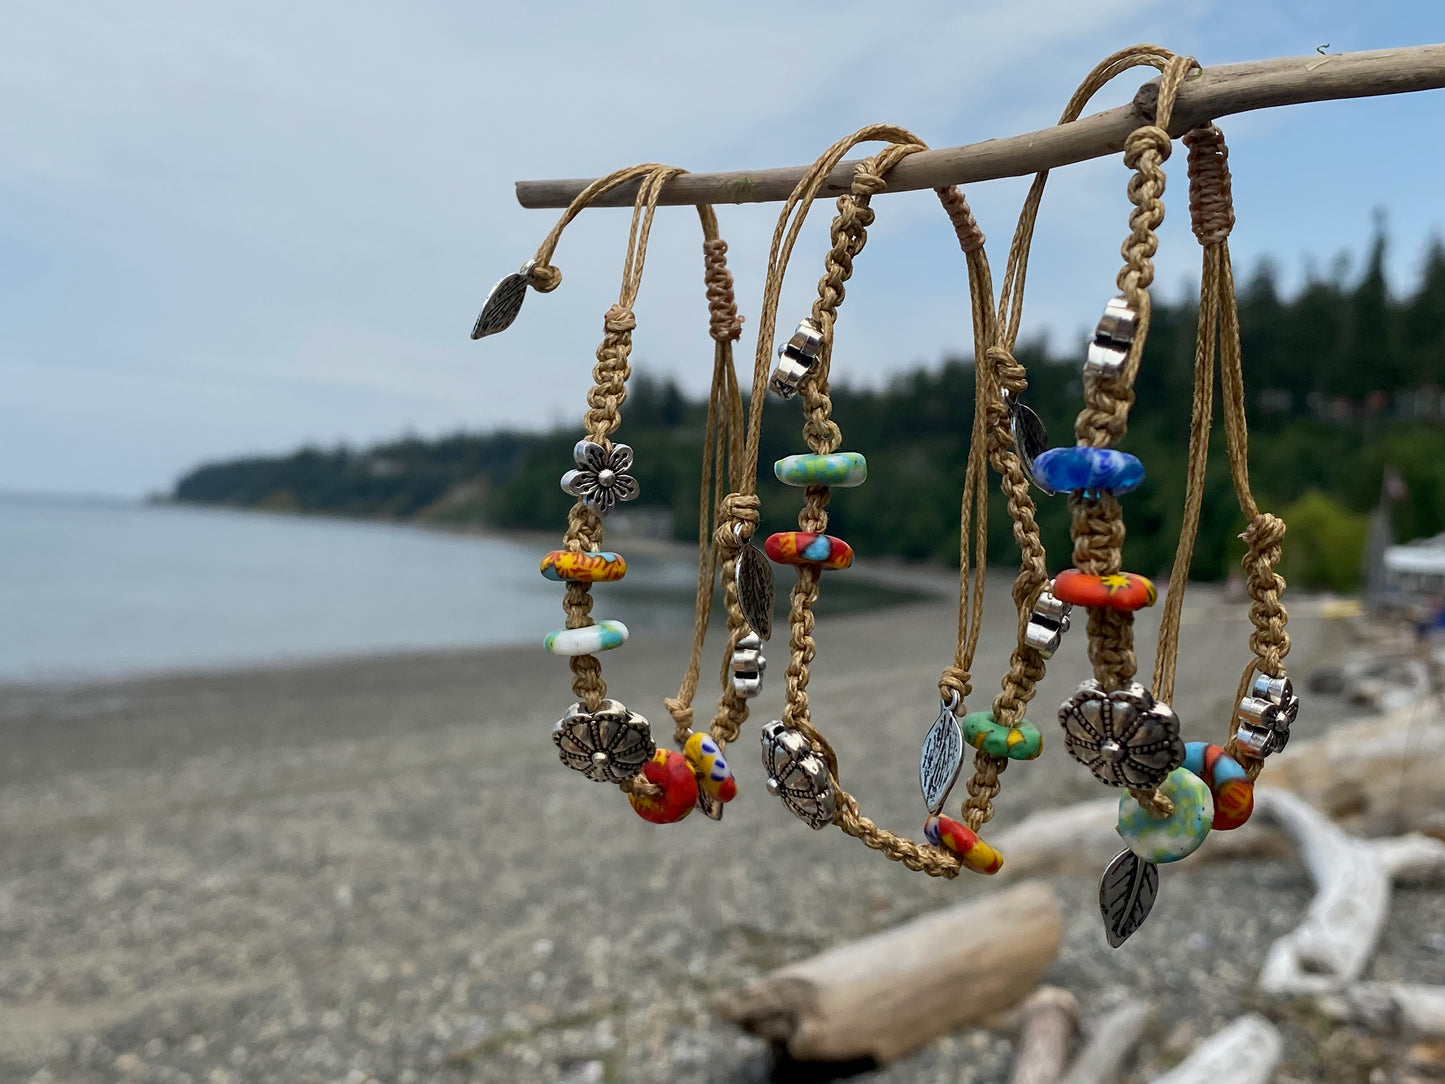 Beautiful woven bracelets with silver beads and african beads, hanging on a piece of driftwood by the ocean